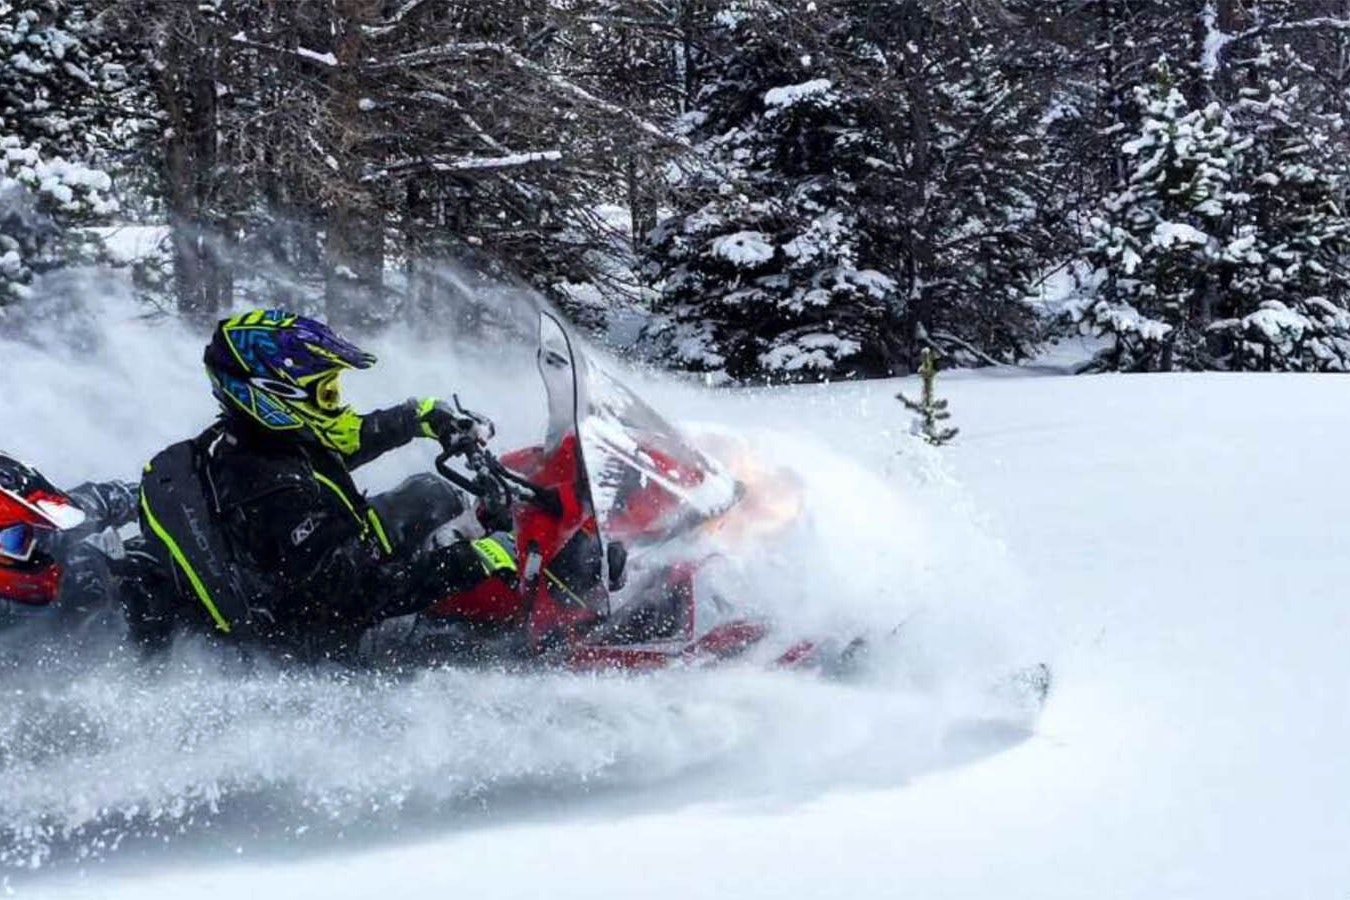 Wyoming's Snowy Range offers some of the nation's best snowmobiling.